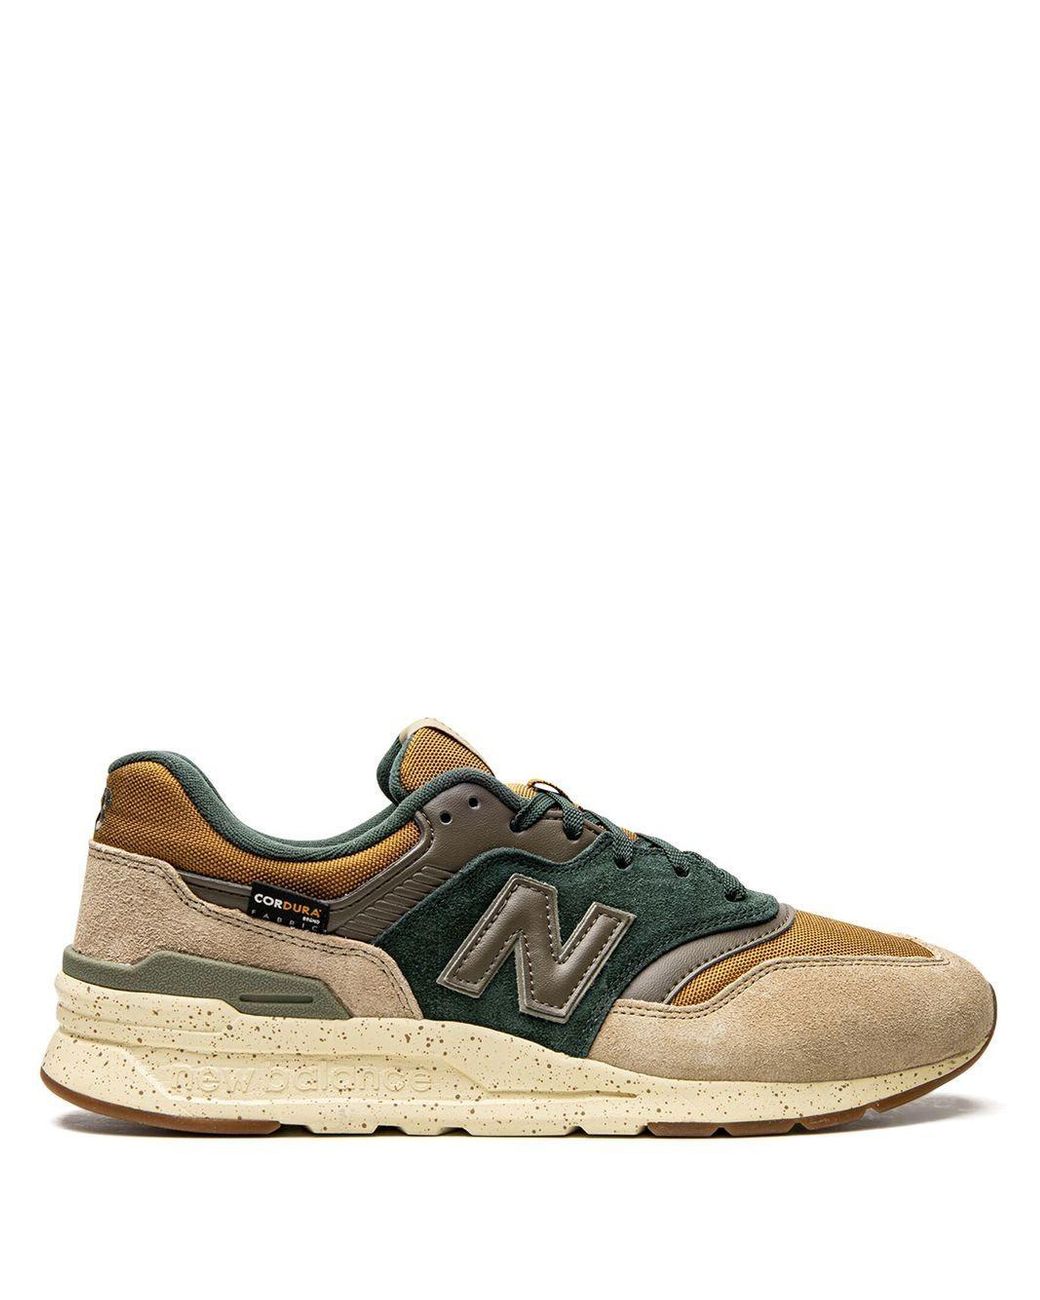 New Balance 997 "forest" Sneakers in for | Lyst